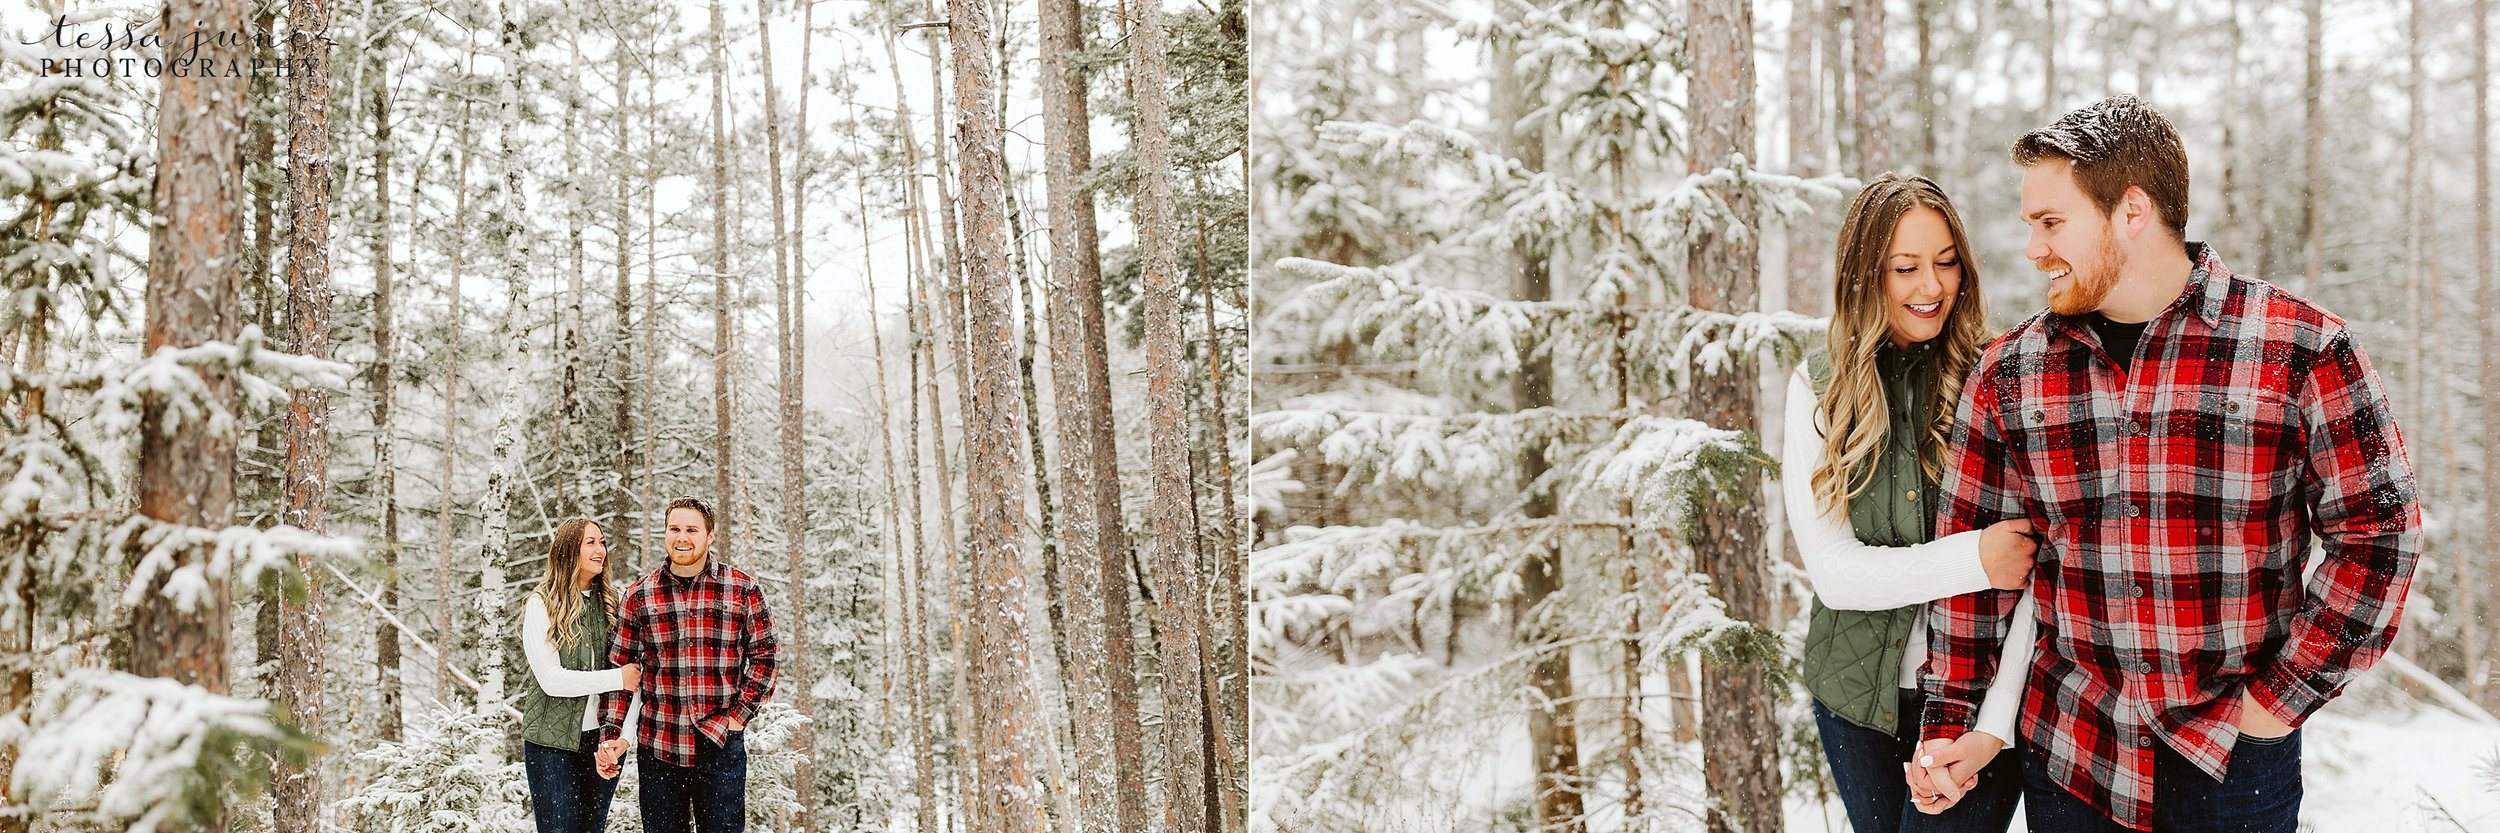 duluth-winter-engagement-forest-photos-during-snow-storm-12.jpg